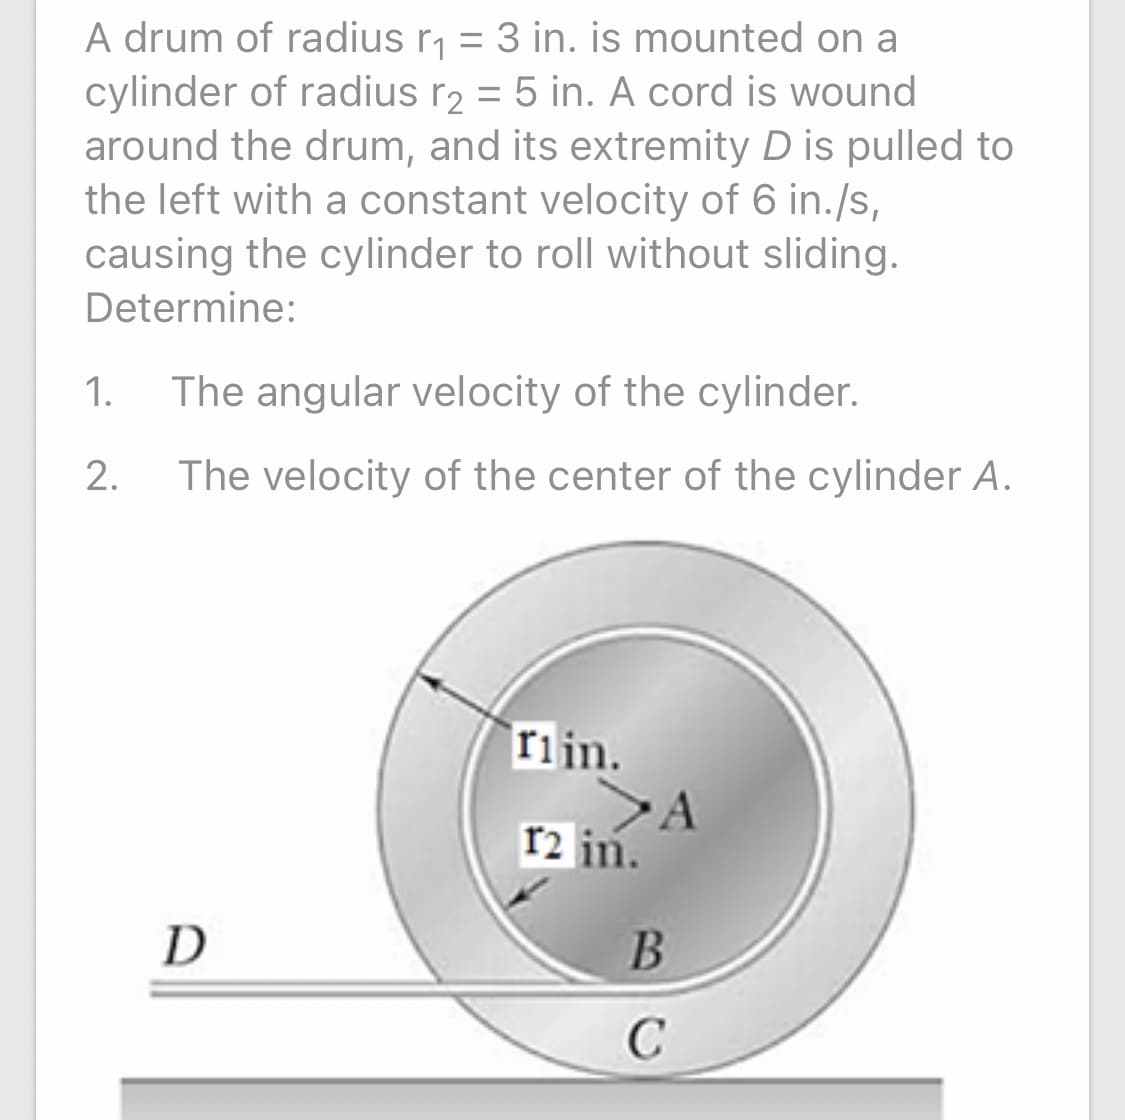 A drum of radius r, = 3 in. is mounted on a
cylinder of radius r2 = 5 in. A cord is wound
around the drum, and its extremity D is pulled to
the left with a constant velocity of 6 in./s,
causing the cylinder to roll without sliding.
Determine:
1.
The angular velocity of the cylinder.
2.
The velocity of the center of the cylinder A.
riin.
r2 in.
D
